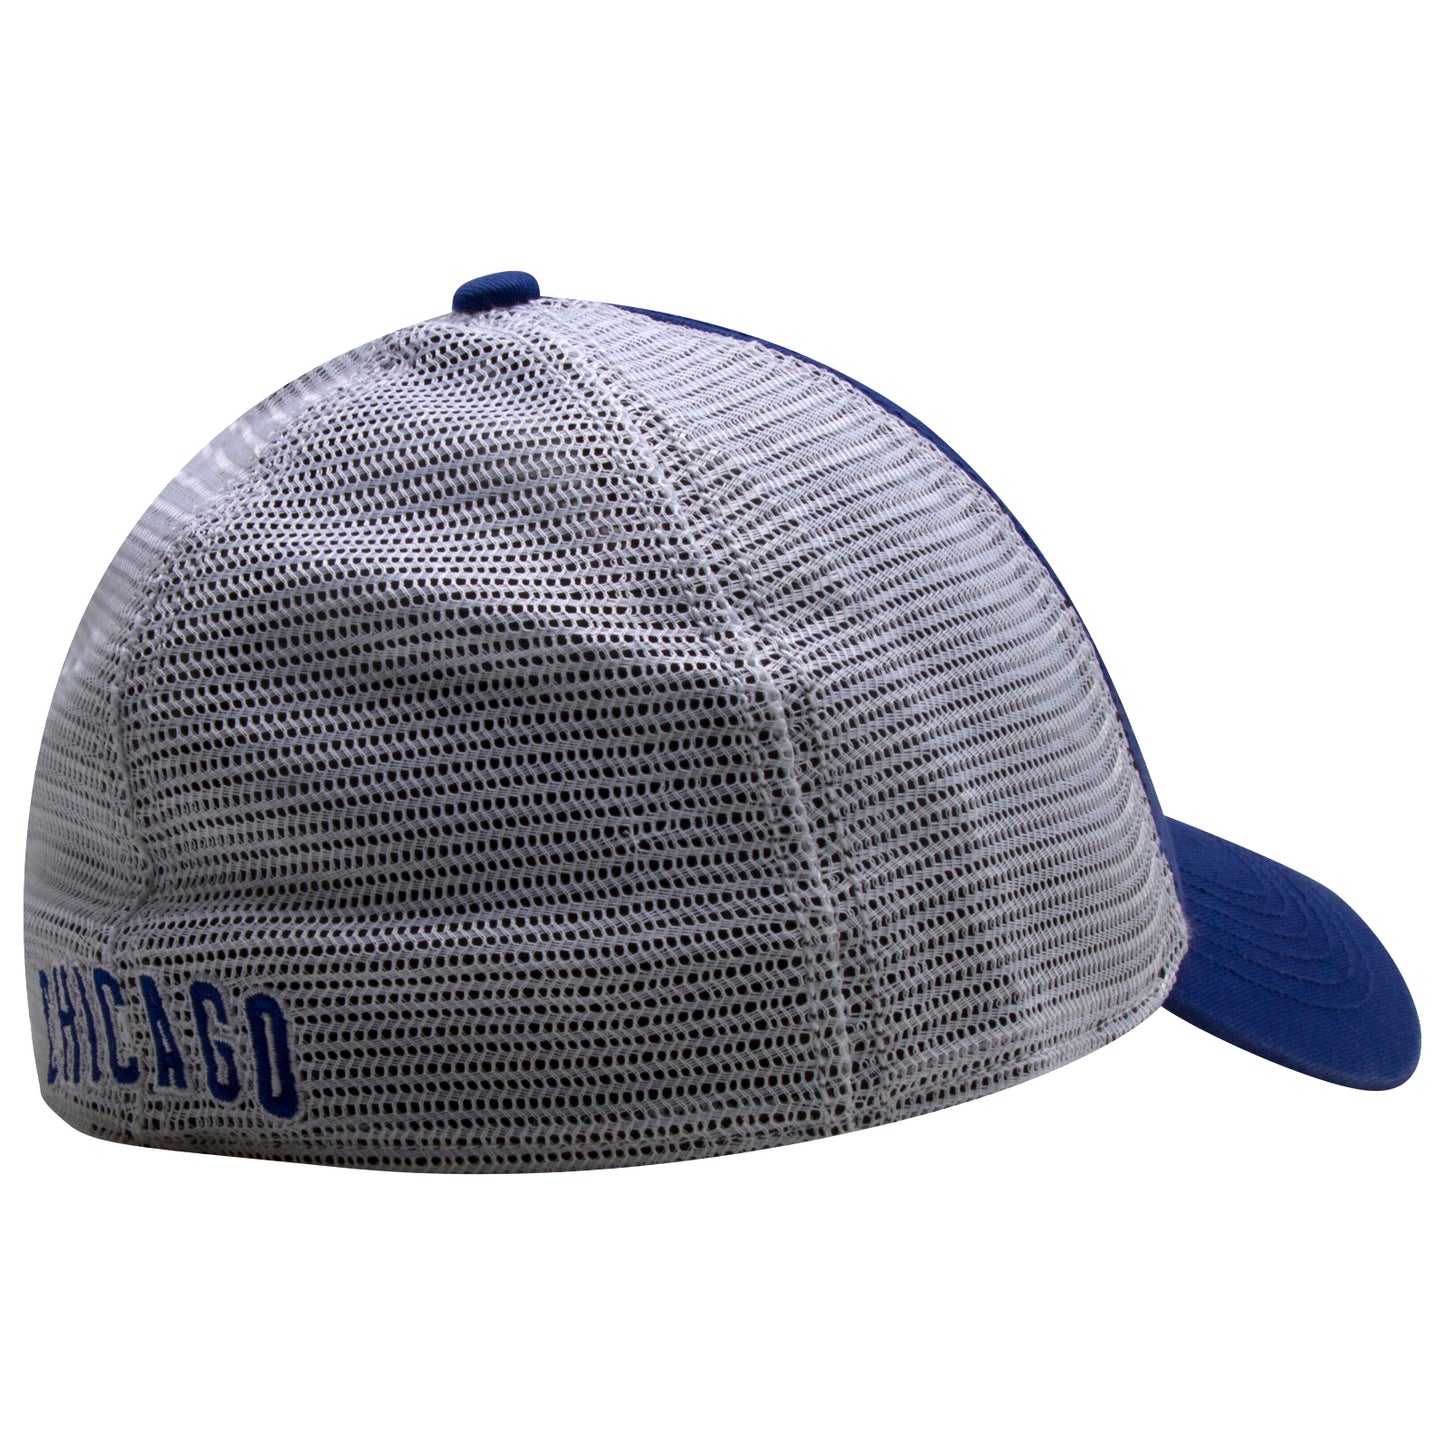 Chicago Cubs Royal and White Mesh "C" Logo Stretch Fit Trucker Style Fitted Hat